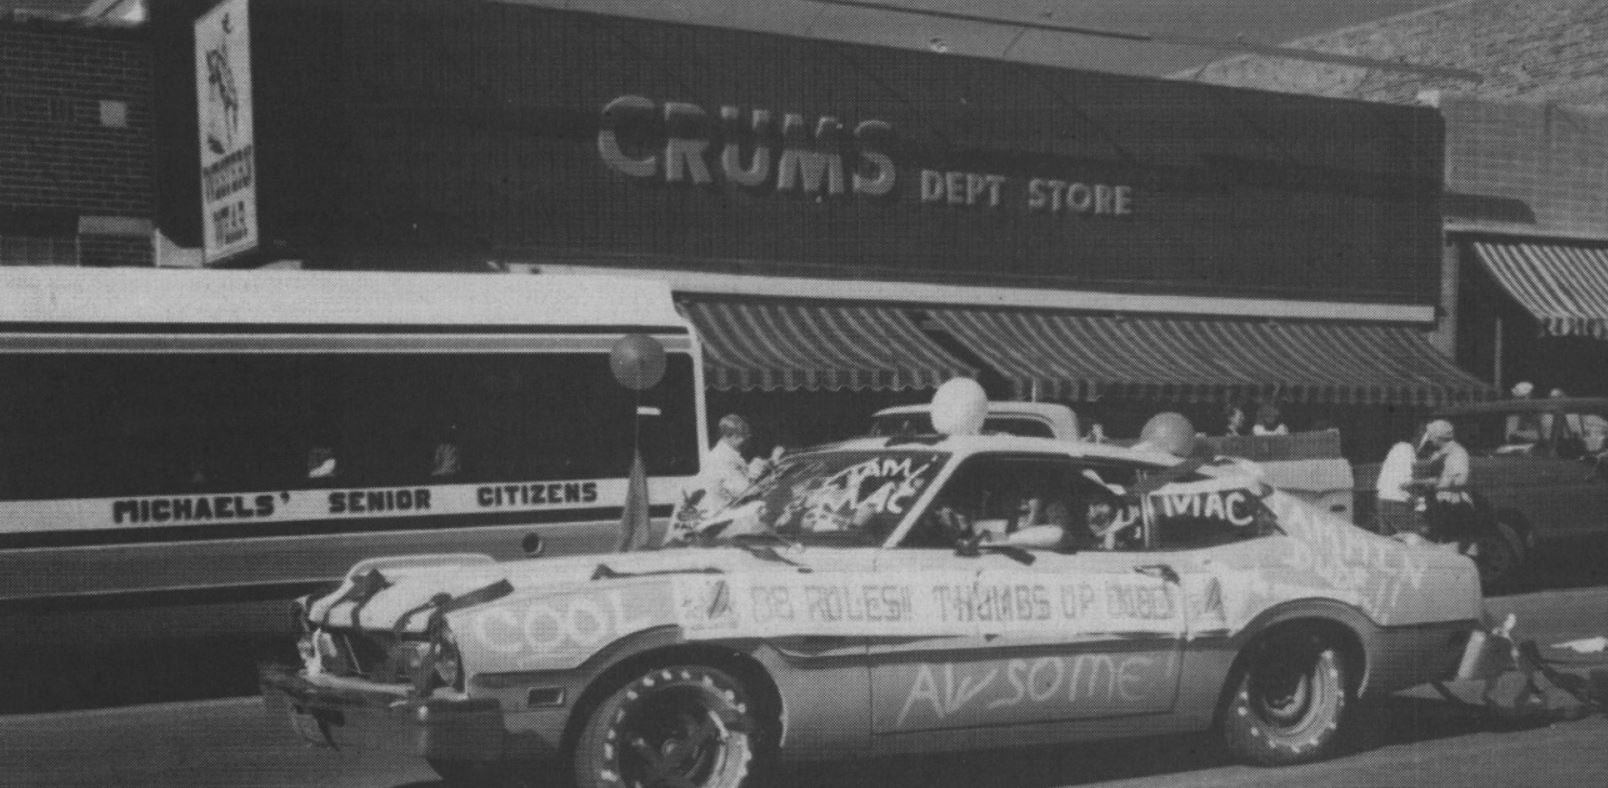 Crums_Department_Store_Newcastle_1980s_New_Location.JPG